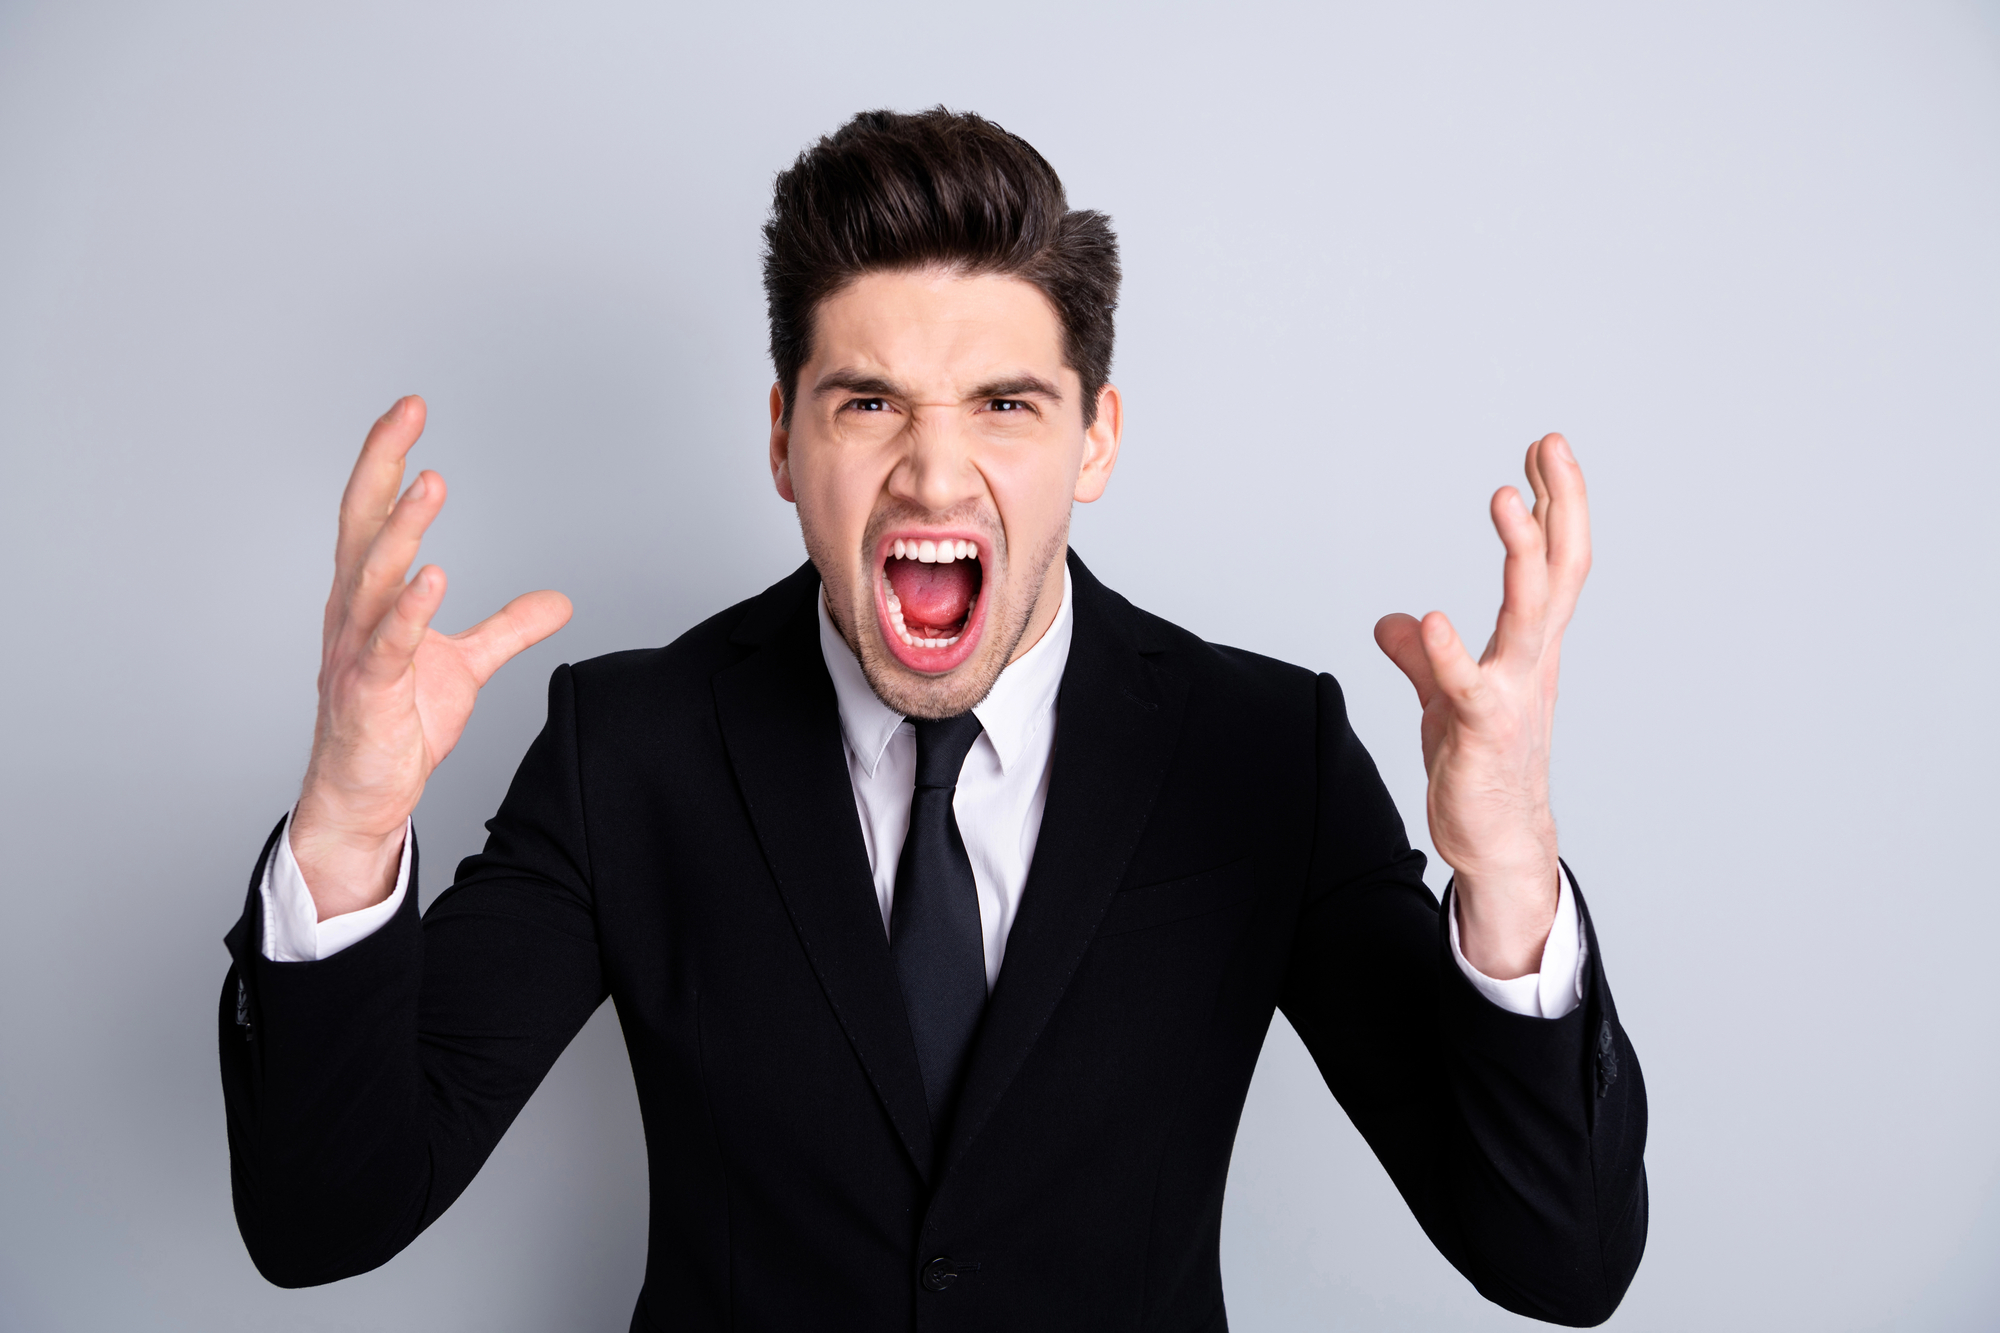 A man in a black suit and tie stands against a plain, light gray background. He appears to be yelling with his mouth wide open, eyebrows raised, and arms raised with fingers spread out, conveying a strong emotion, possibly frustration or anger.